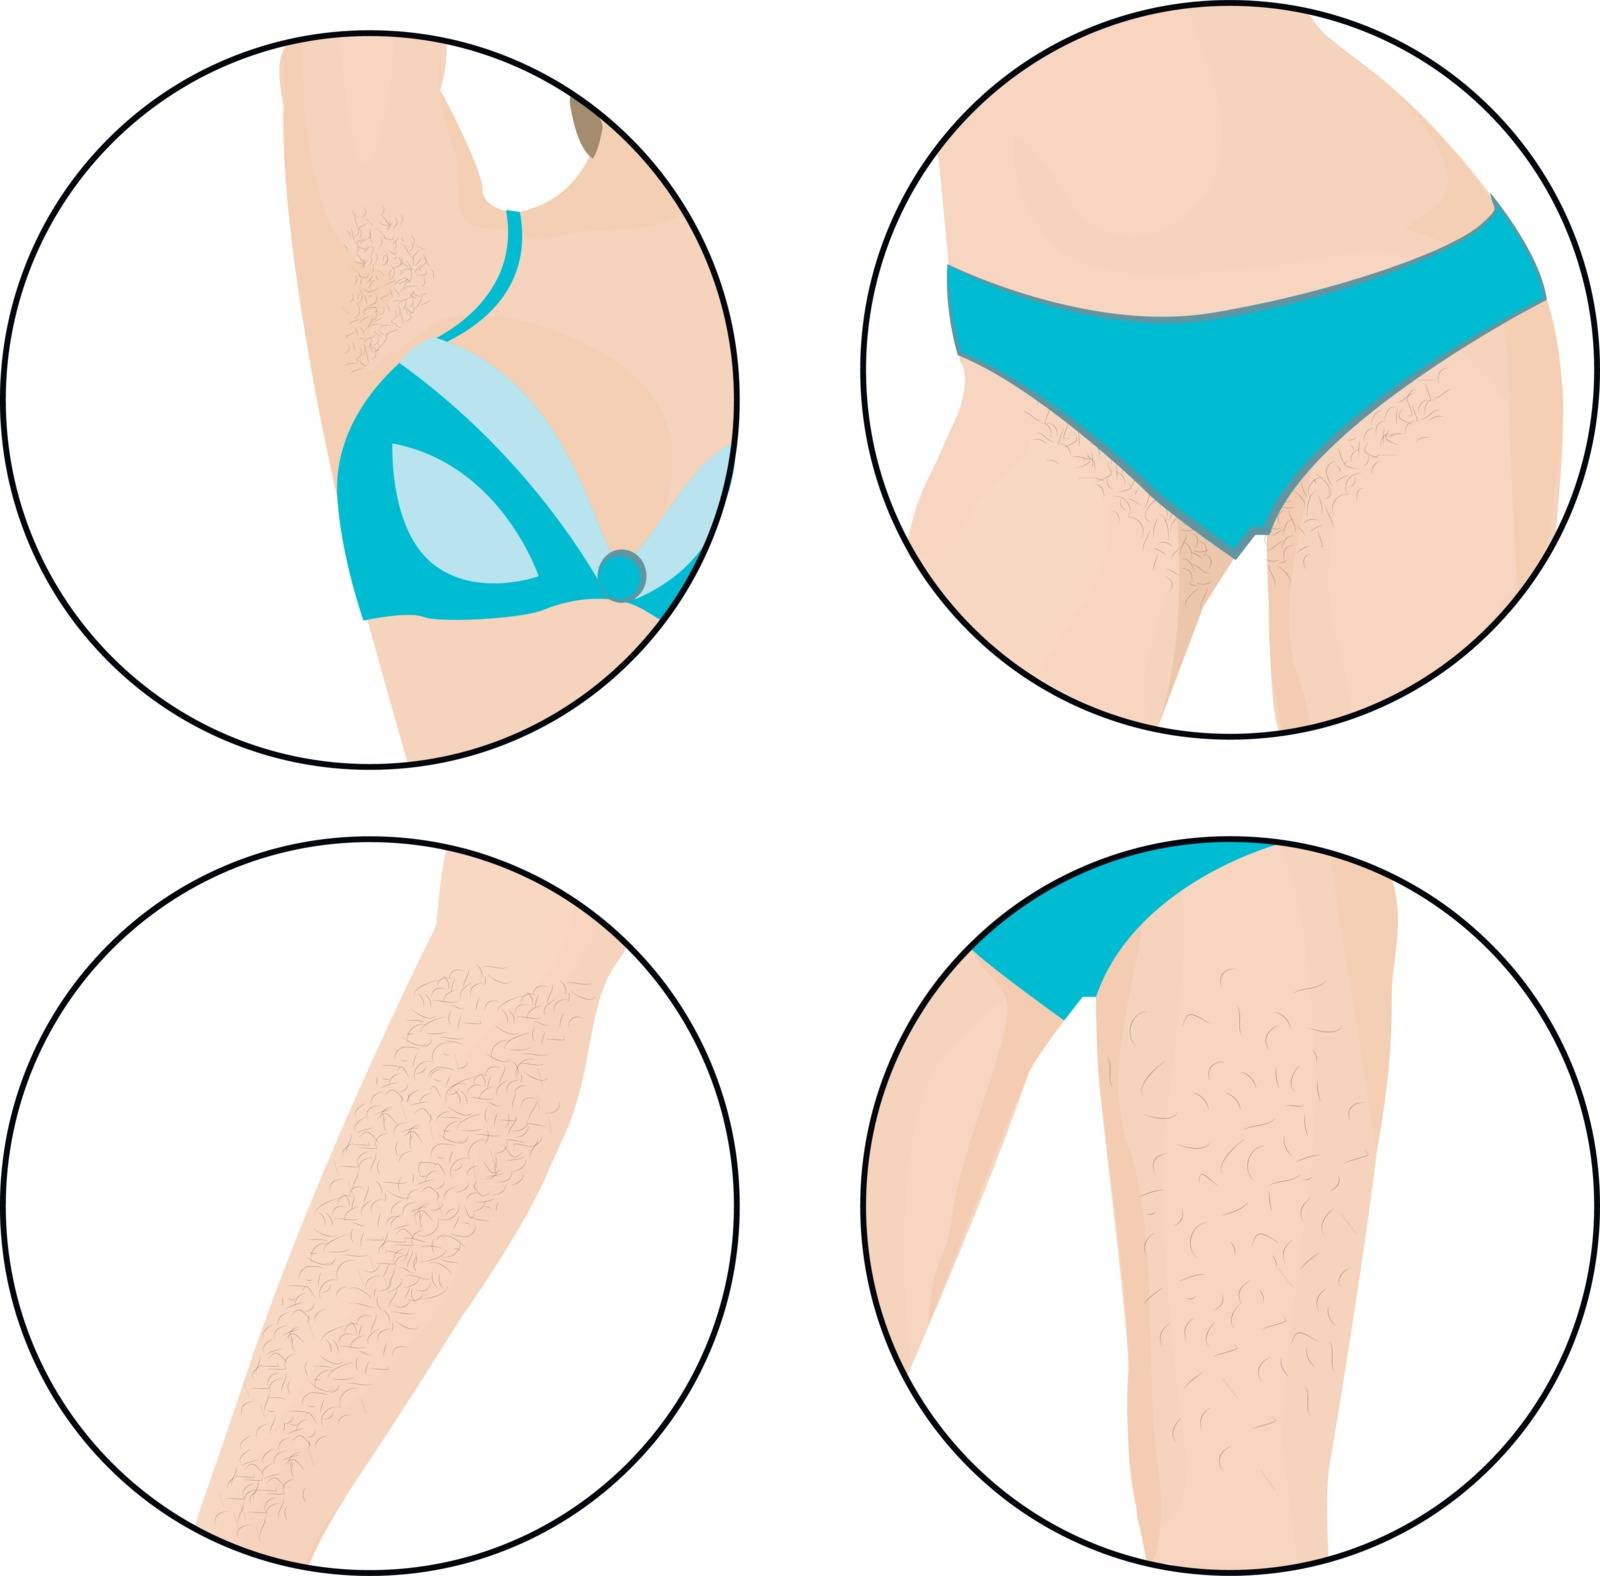 Hair removal zones  on a girl's body vector illustration